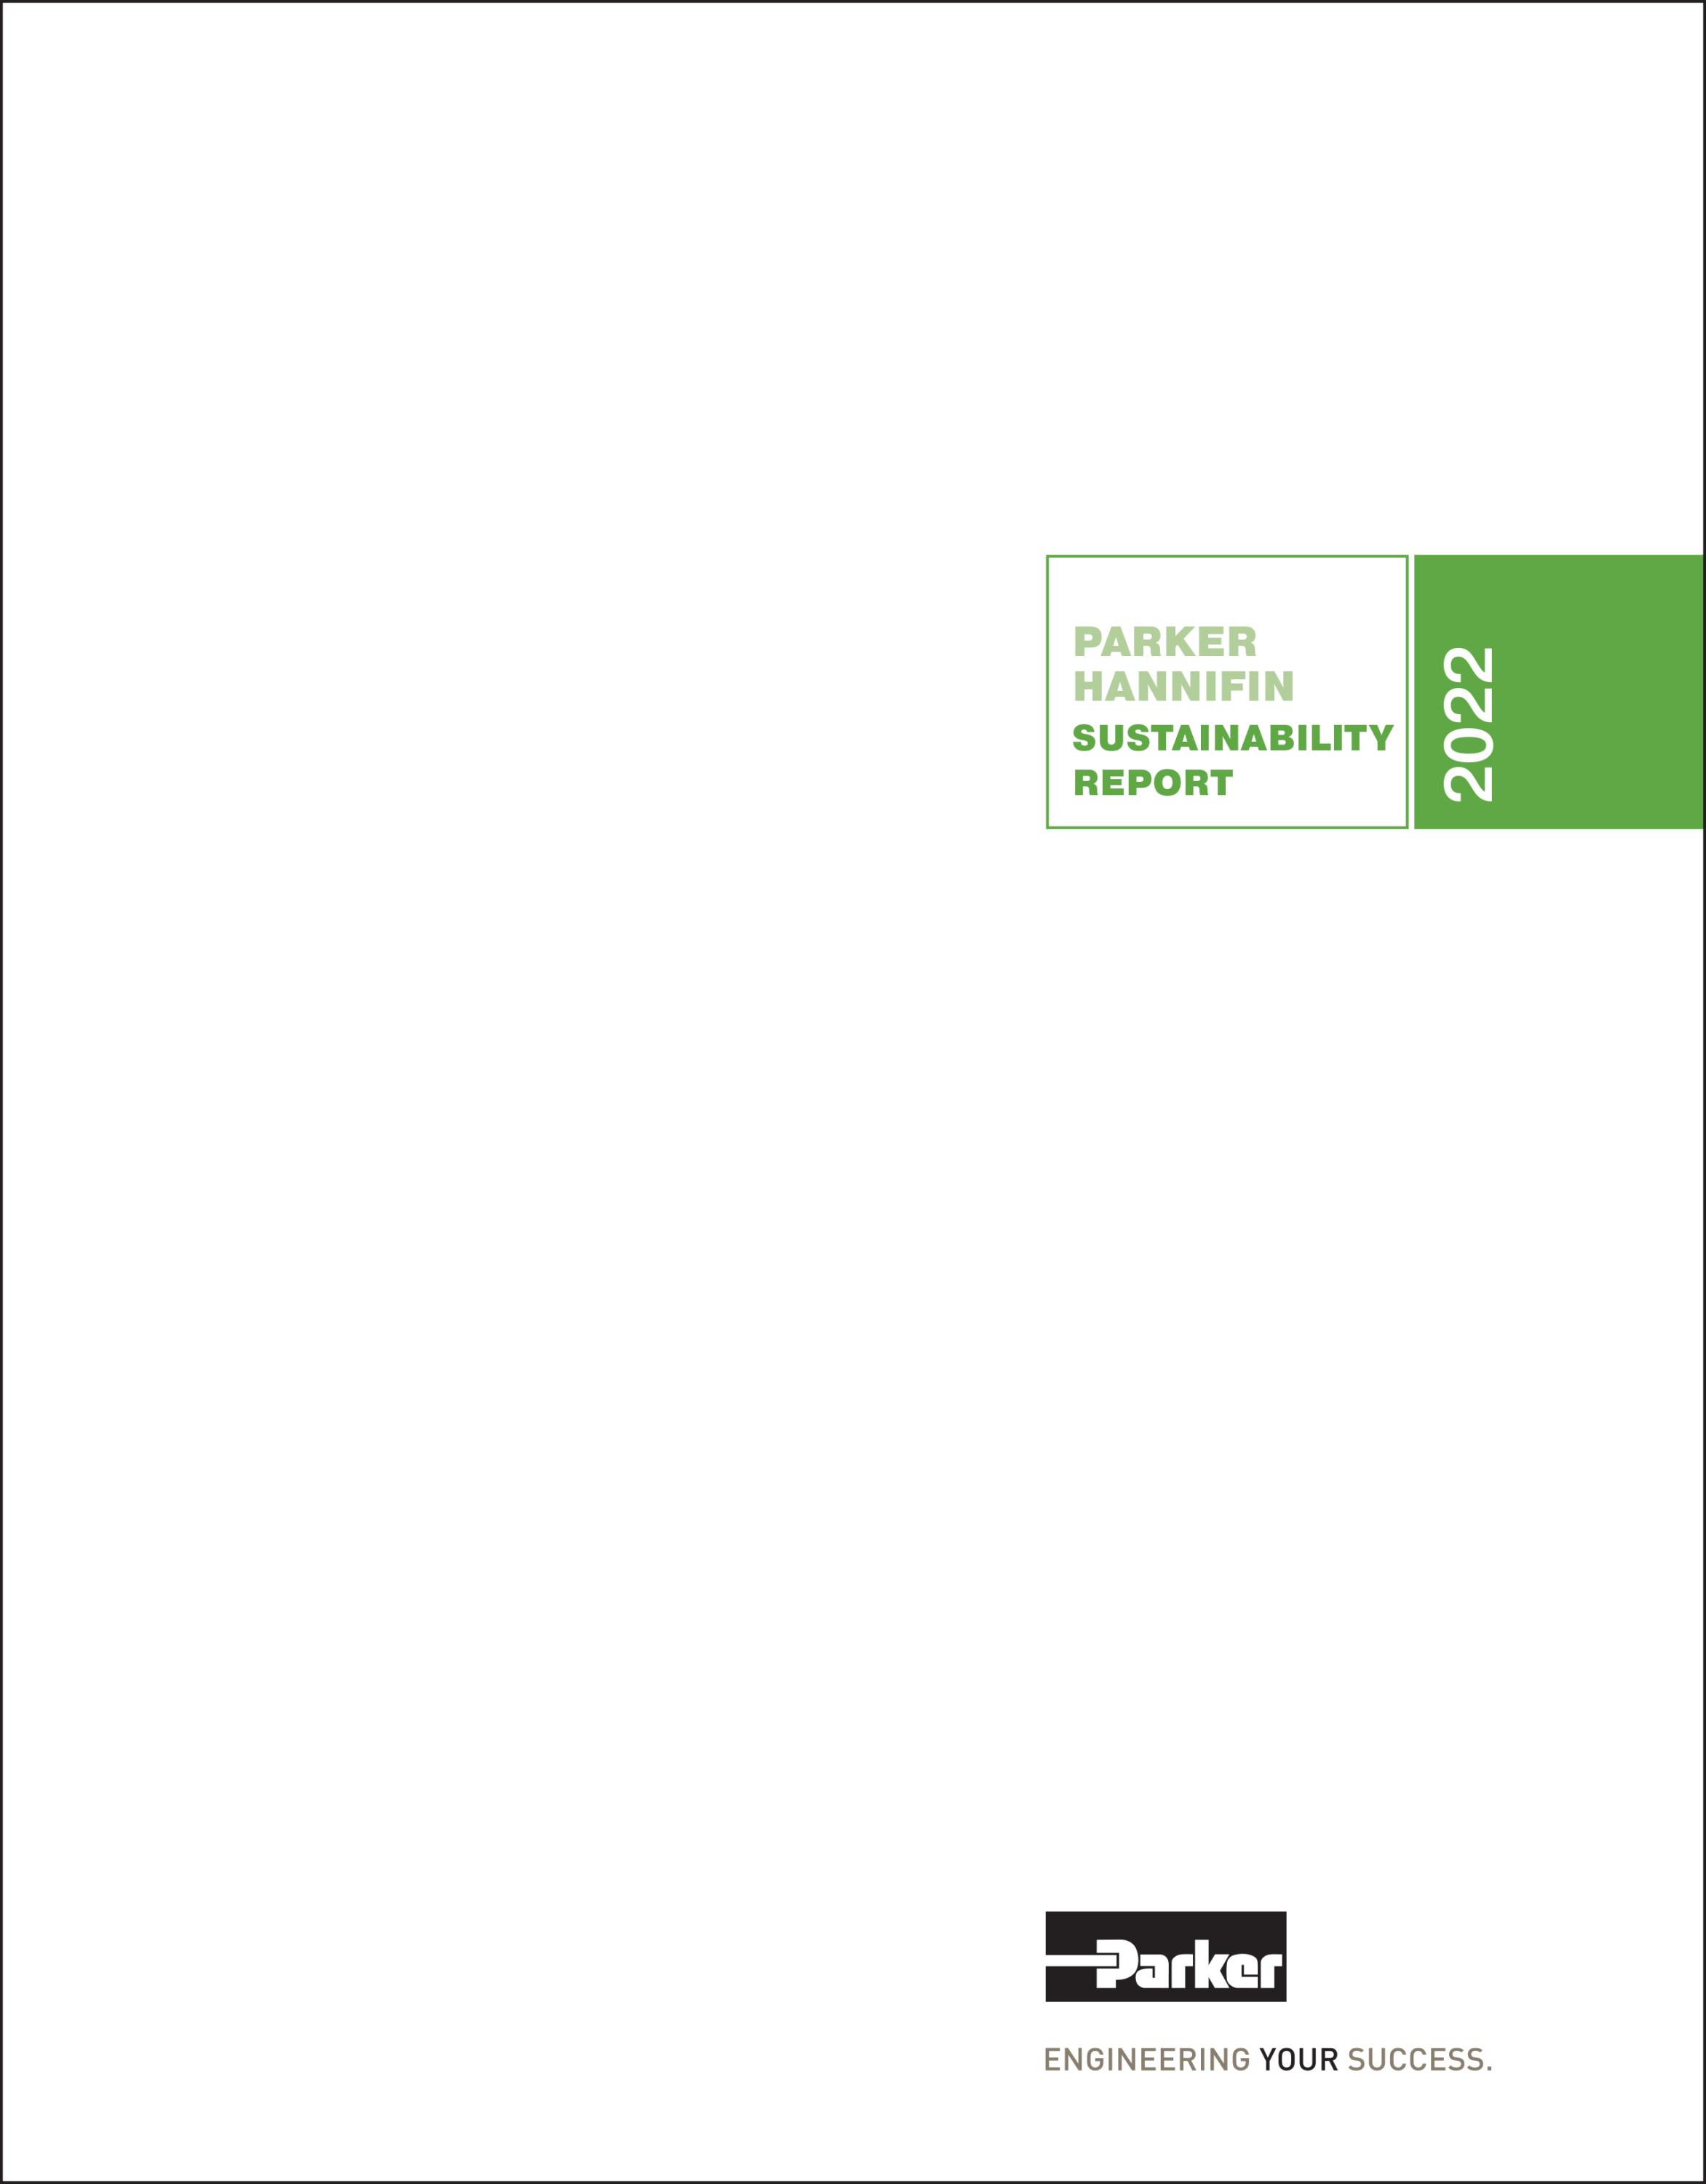 Cover of Parker Hannifin's 2022 Sustainability Report